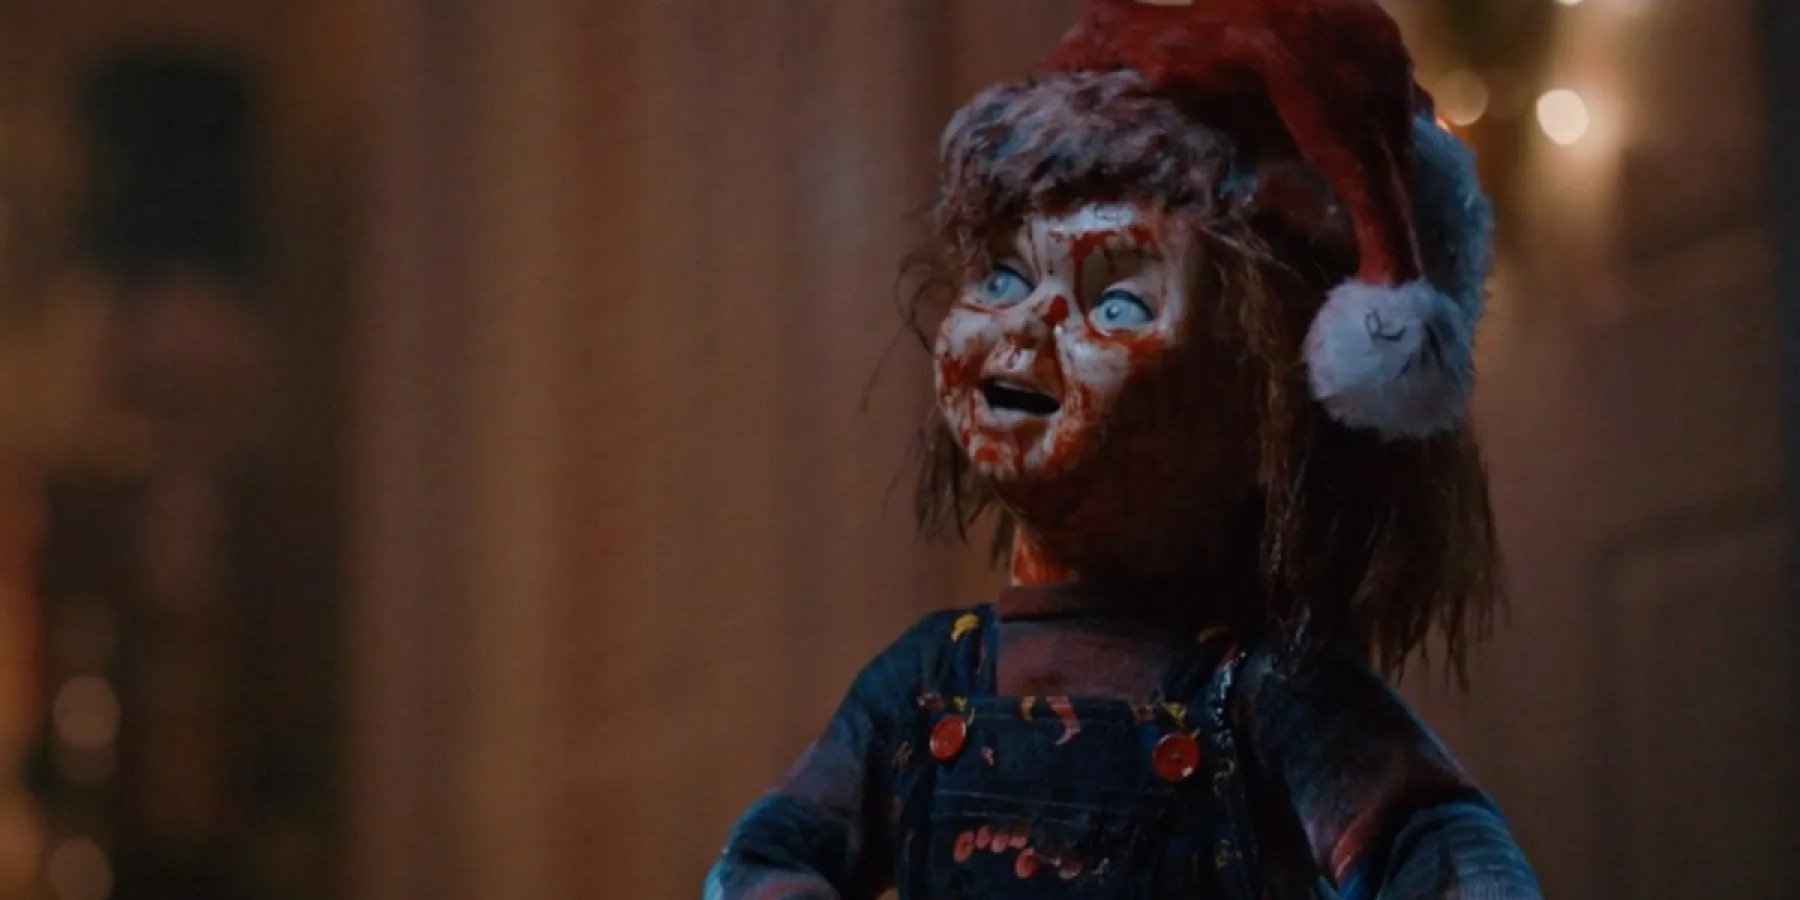 Chucky wearing a Santa hat while covered in blood in Chucky season 2